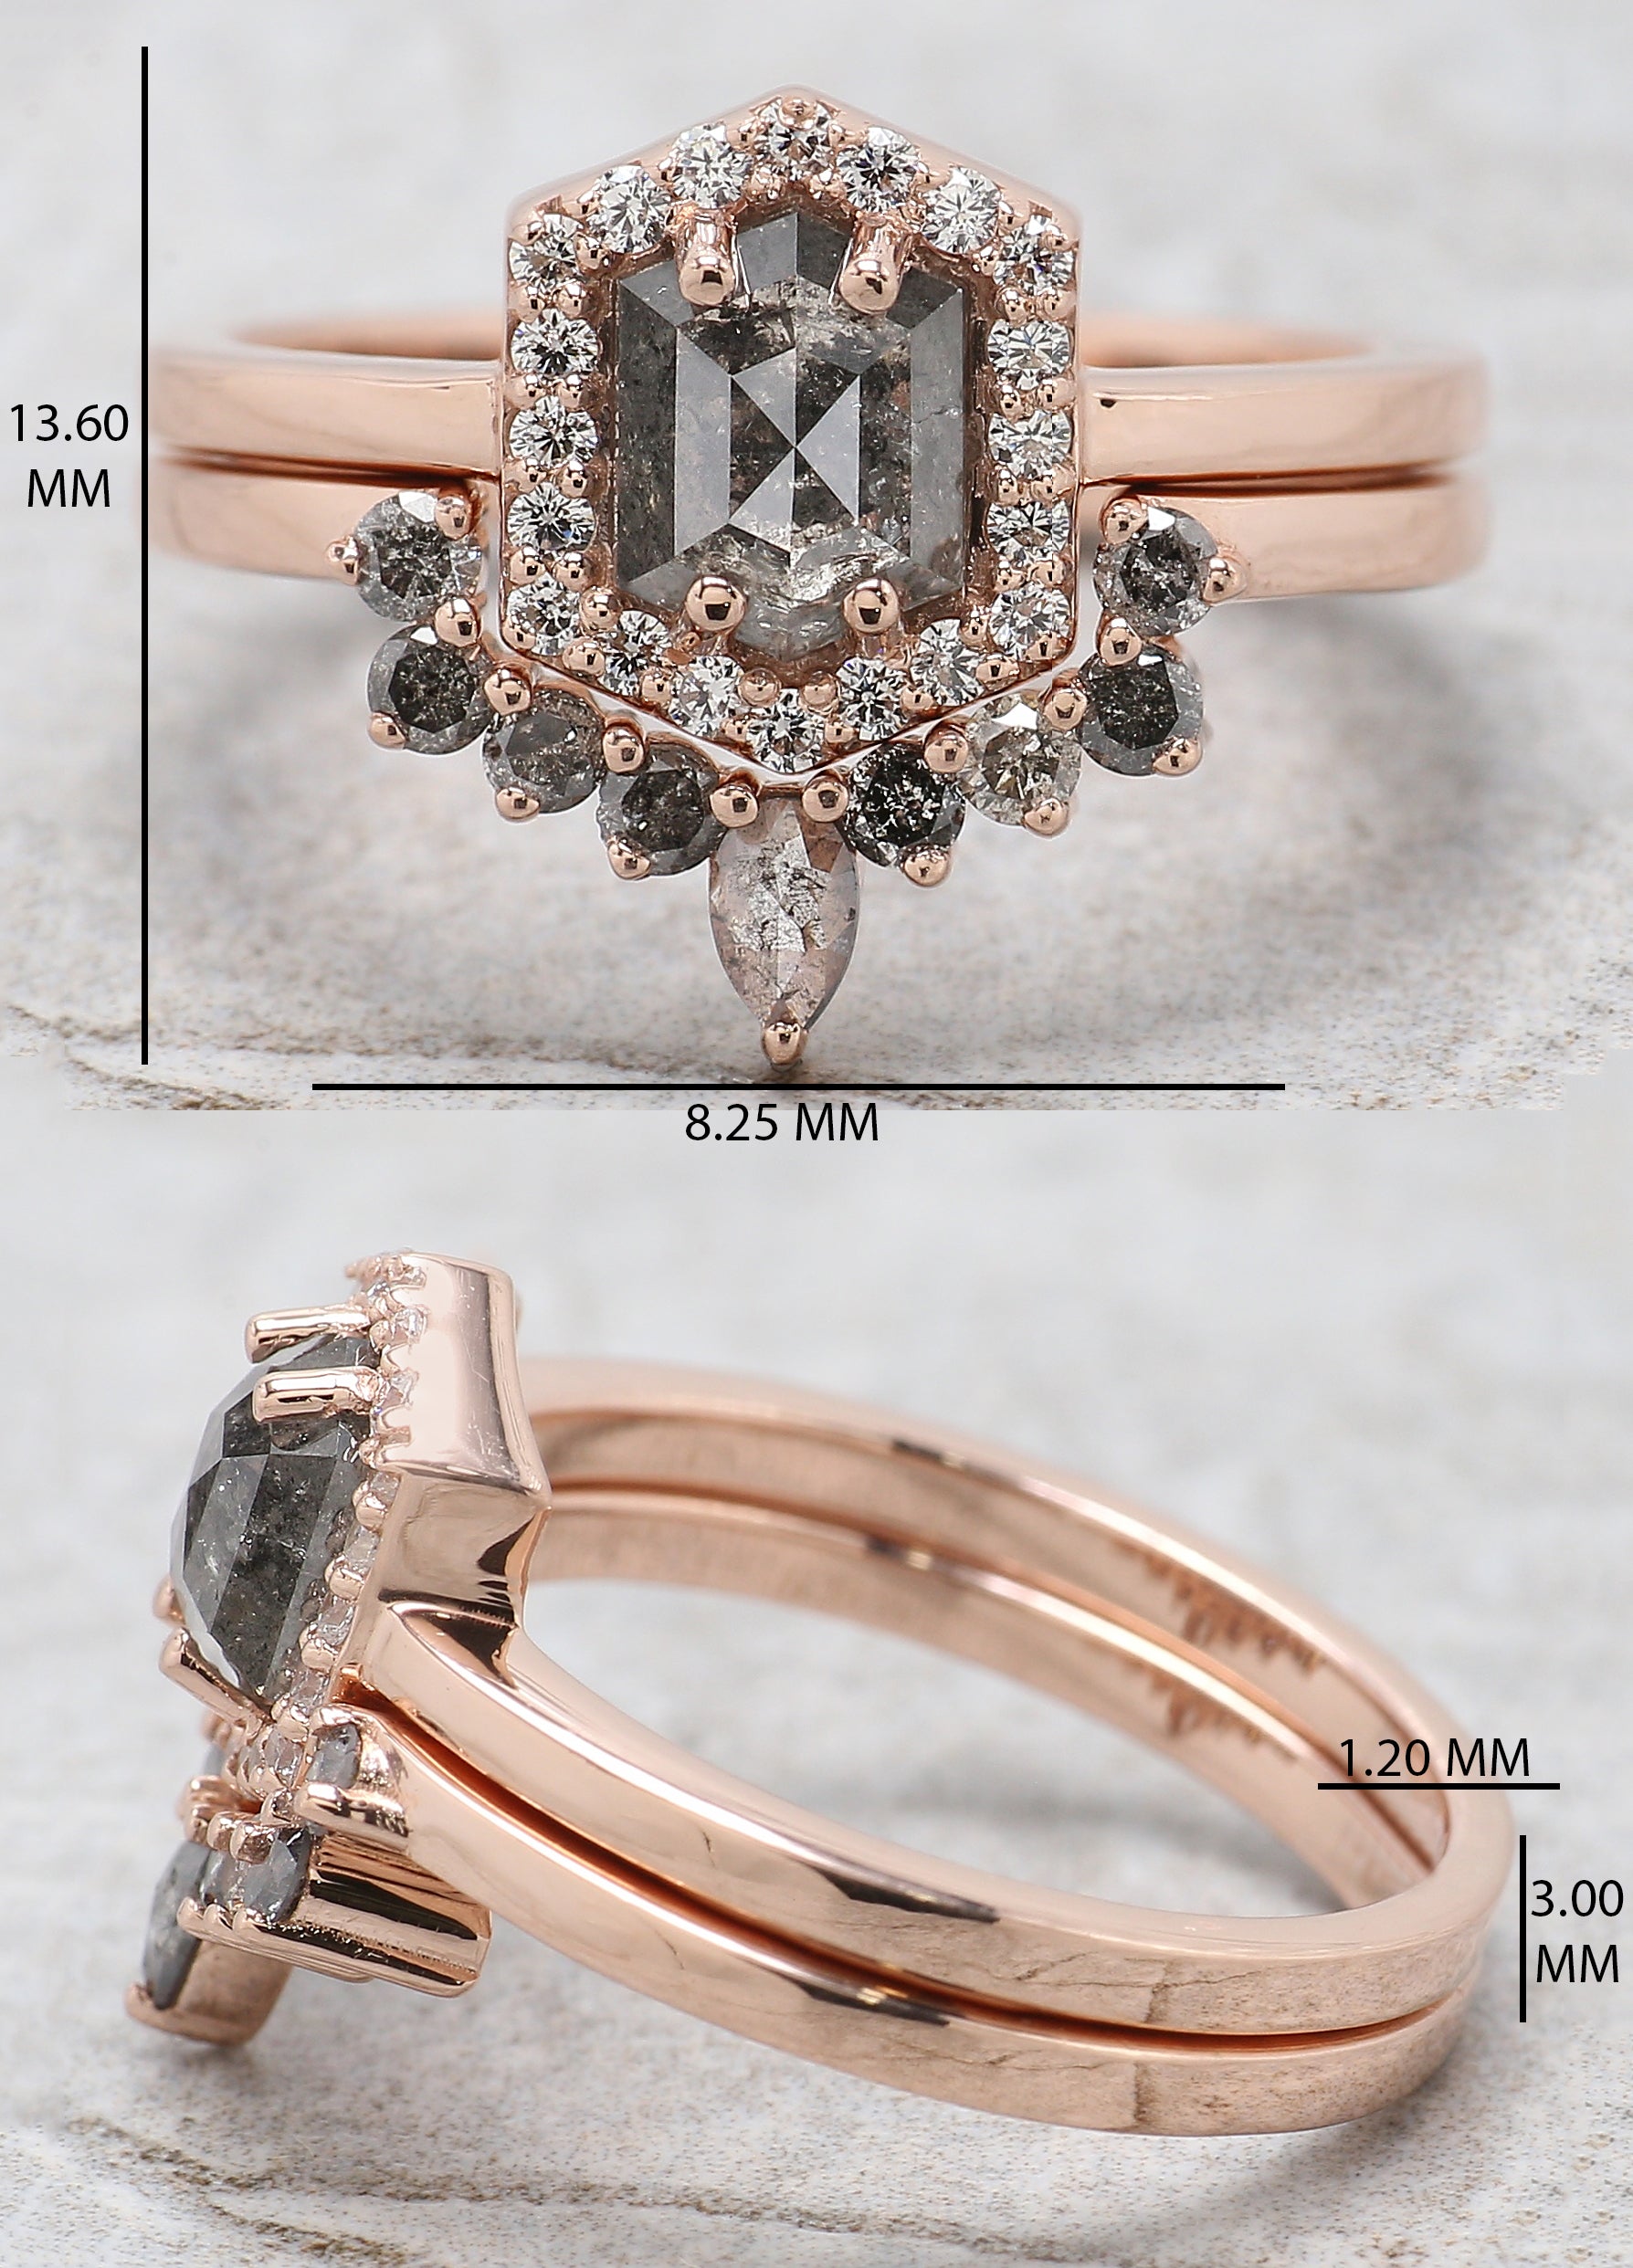 Hexagon Cut Salt And Pepper Diamond Ring 0.95 Ct 6.40 MM Hexagon Diamond Ring 14K Solid Rose Gold Silver Engagement Ring Gift For Her QN1448